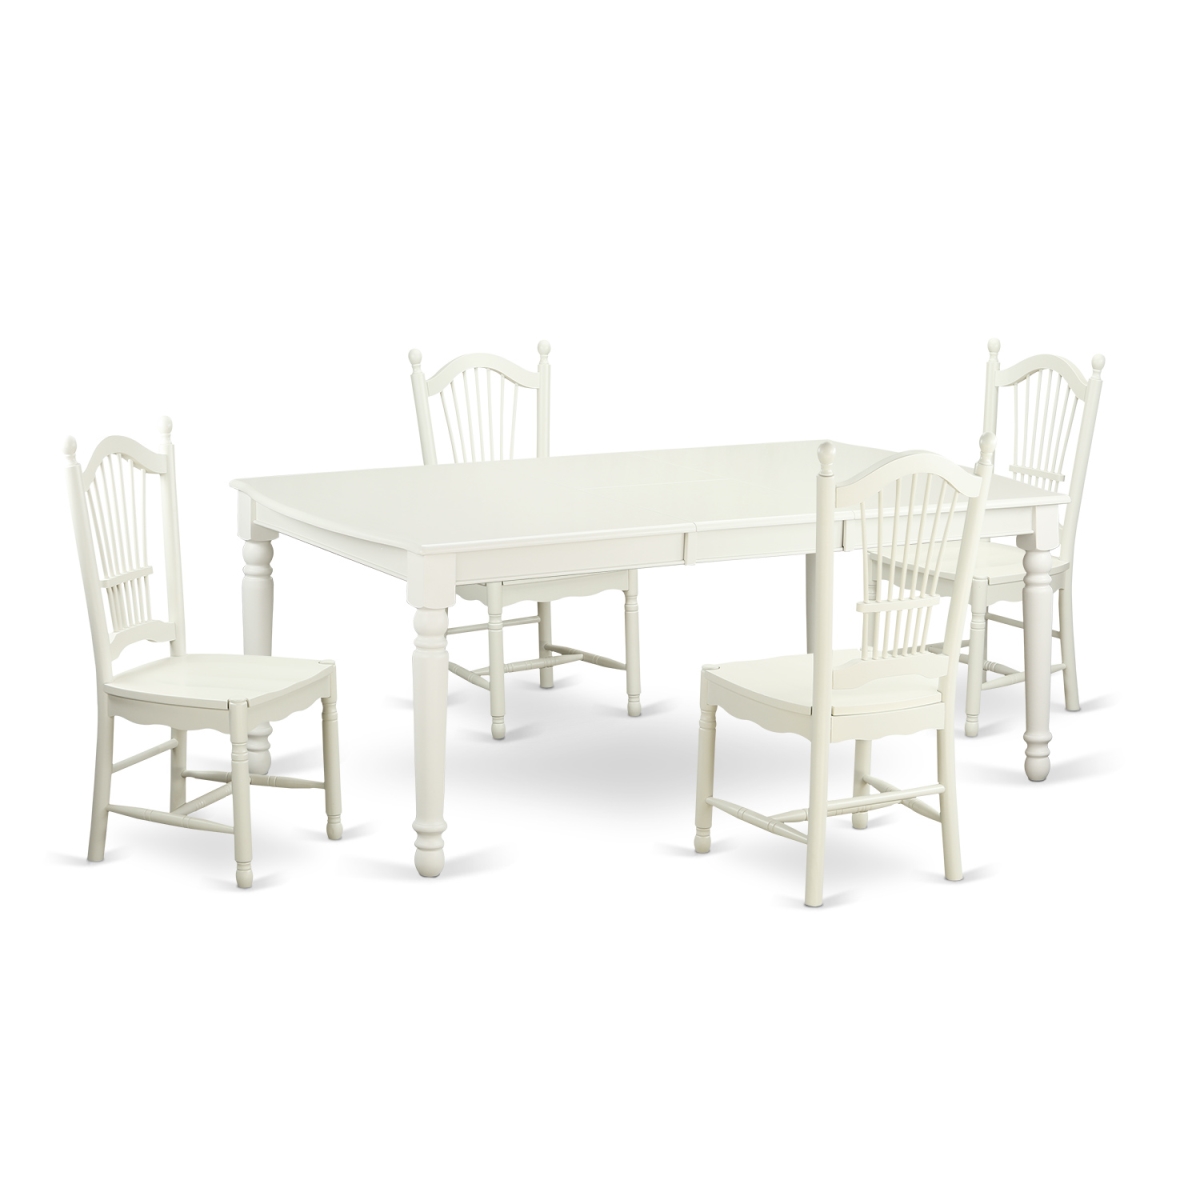 Dinette Table Set - Kitchen Table & 4 Chairs, Linen White - 5 Piece